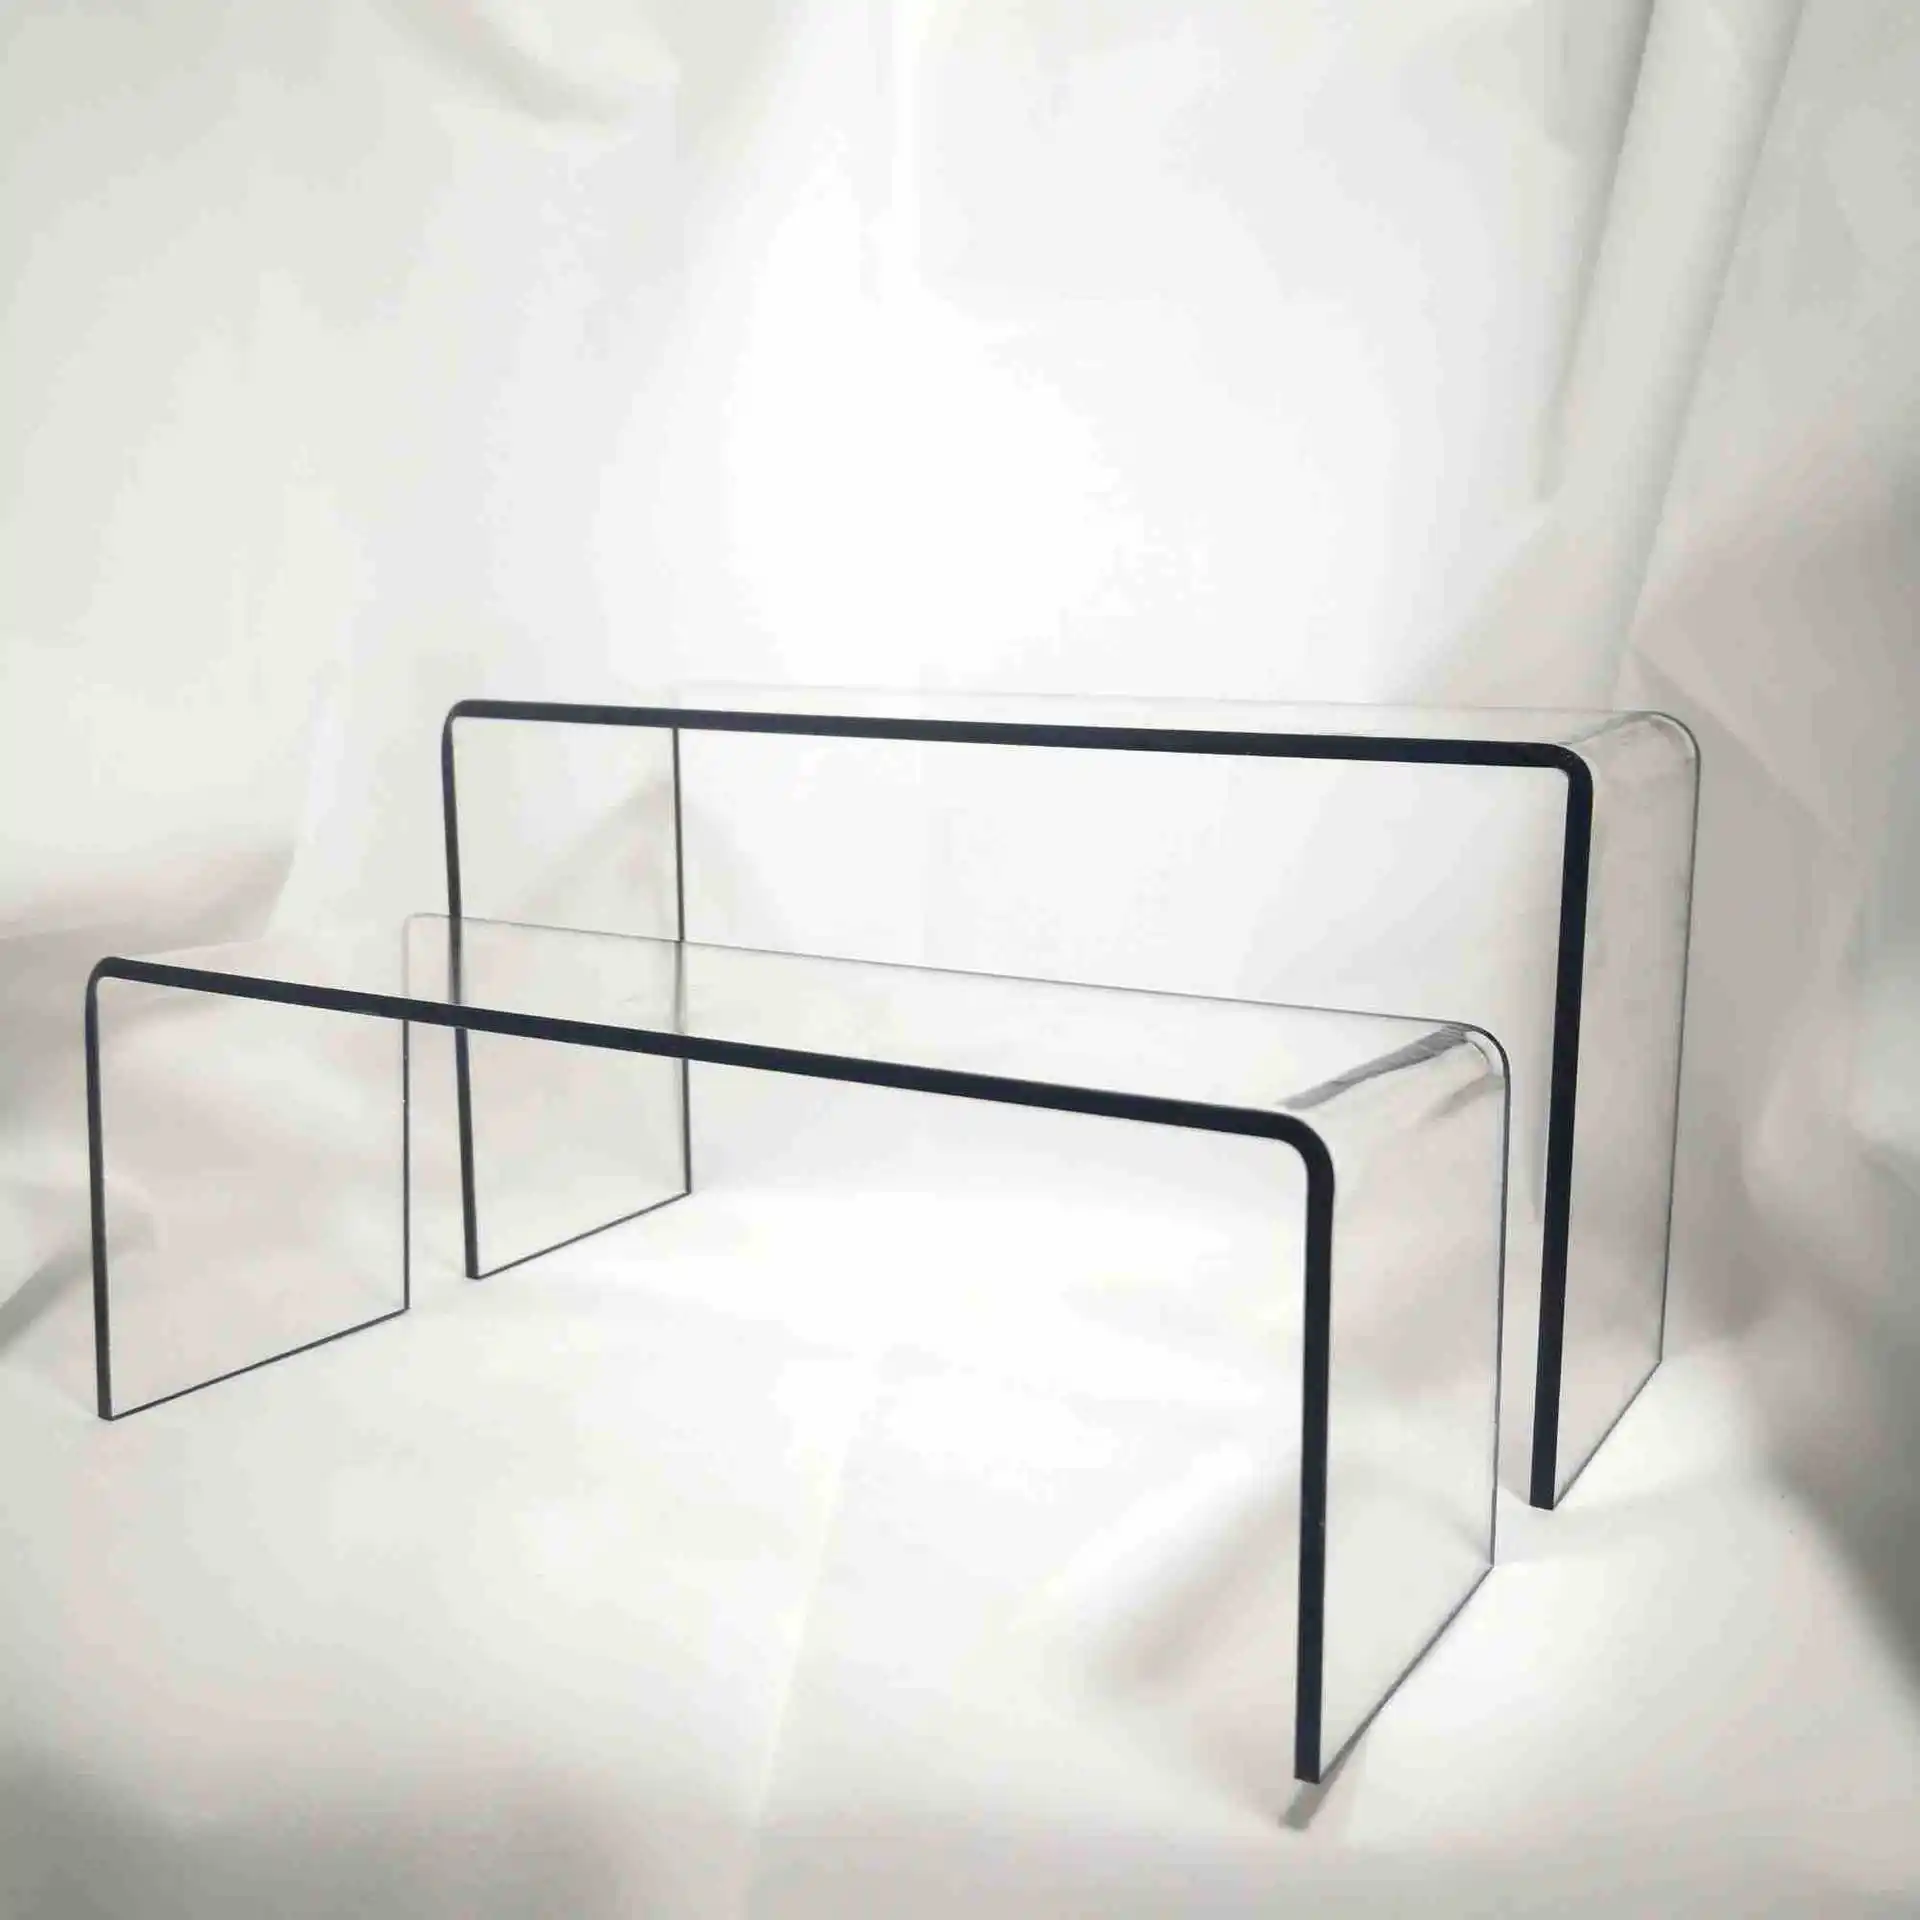 Clear Acrylic Display Risers Collectibles Display Stands Riser Shelf Showcase for Retail Shoes Jewelry Dessert